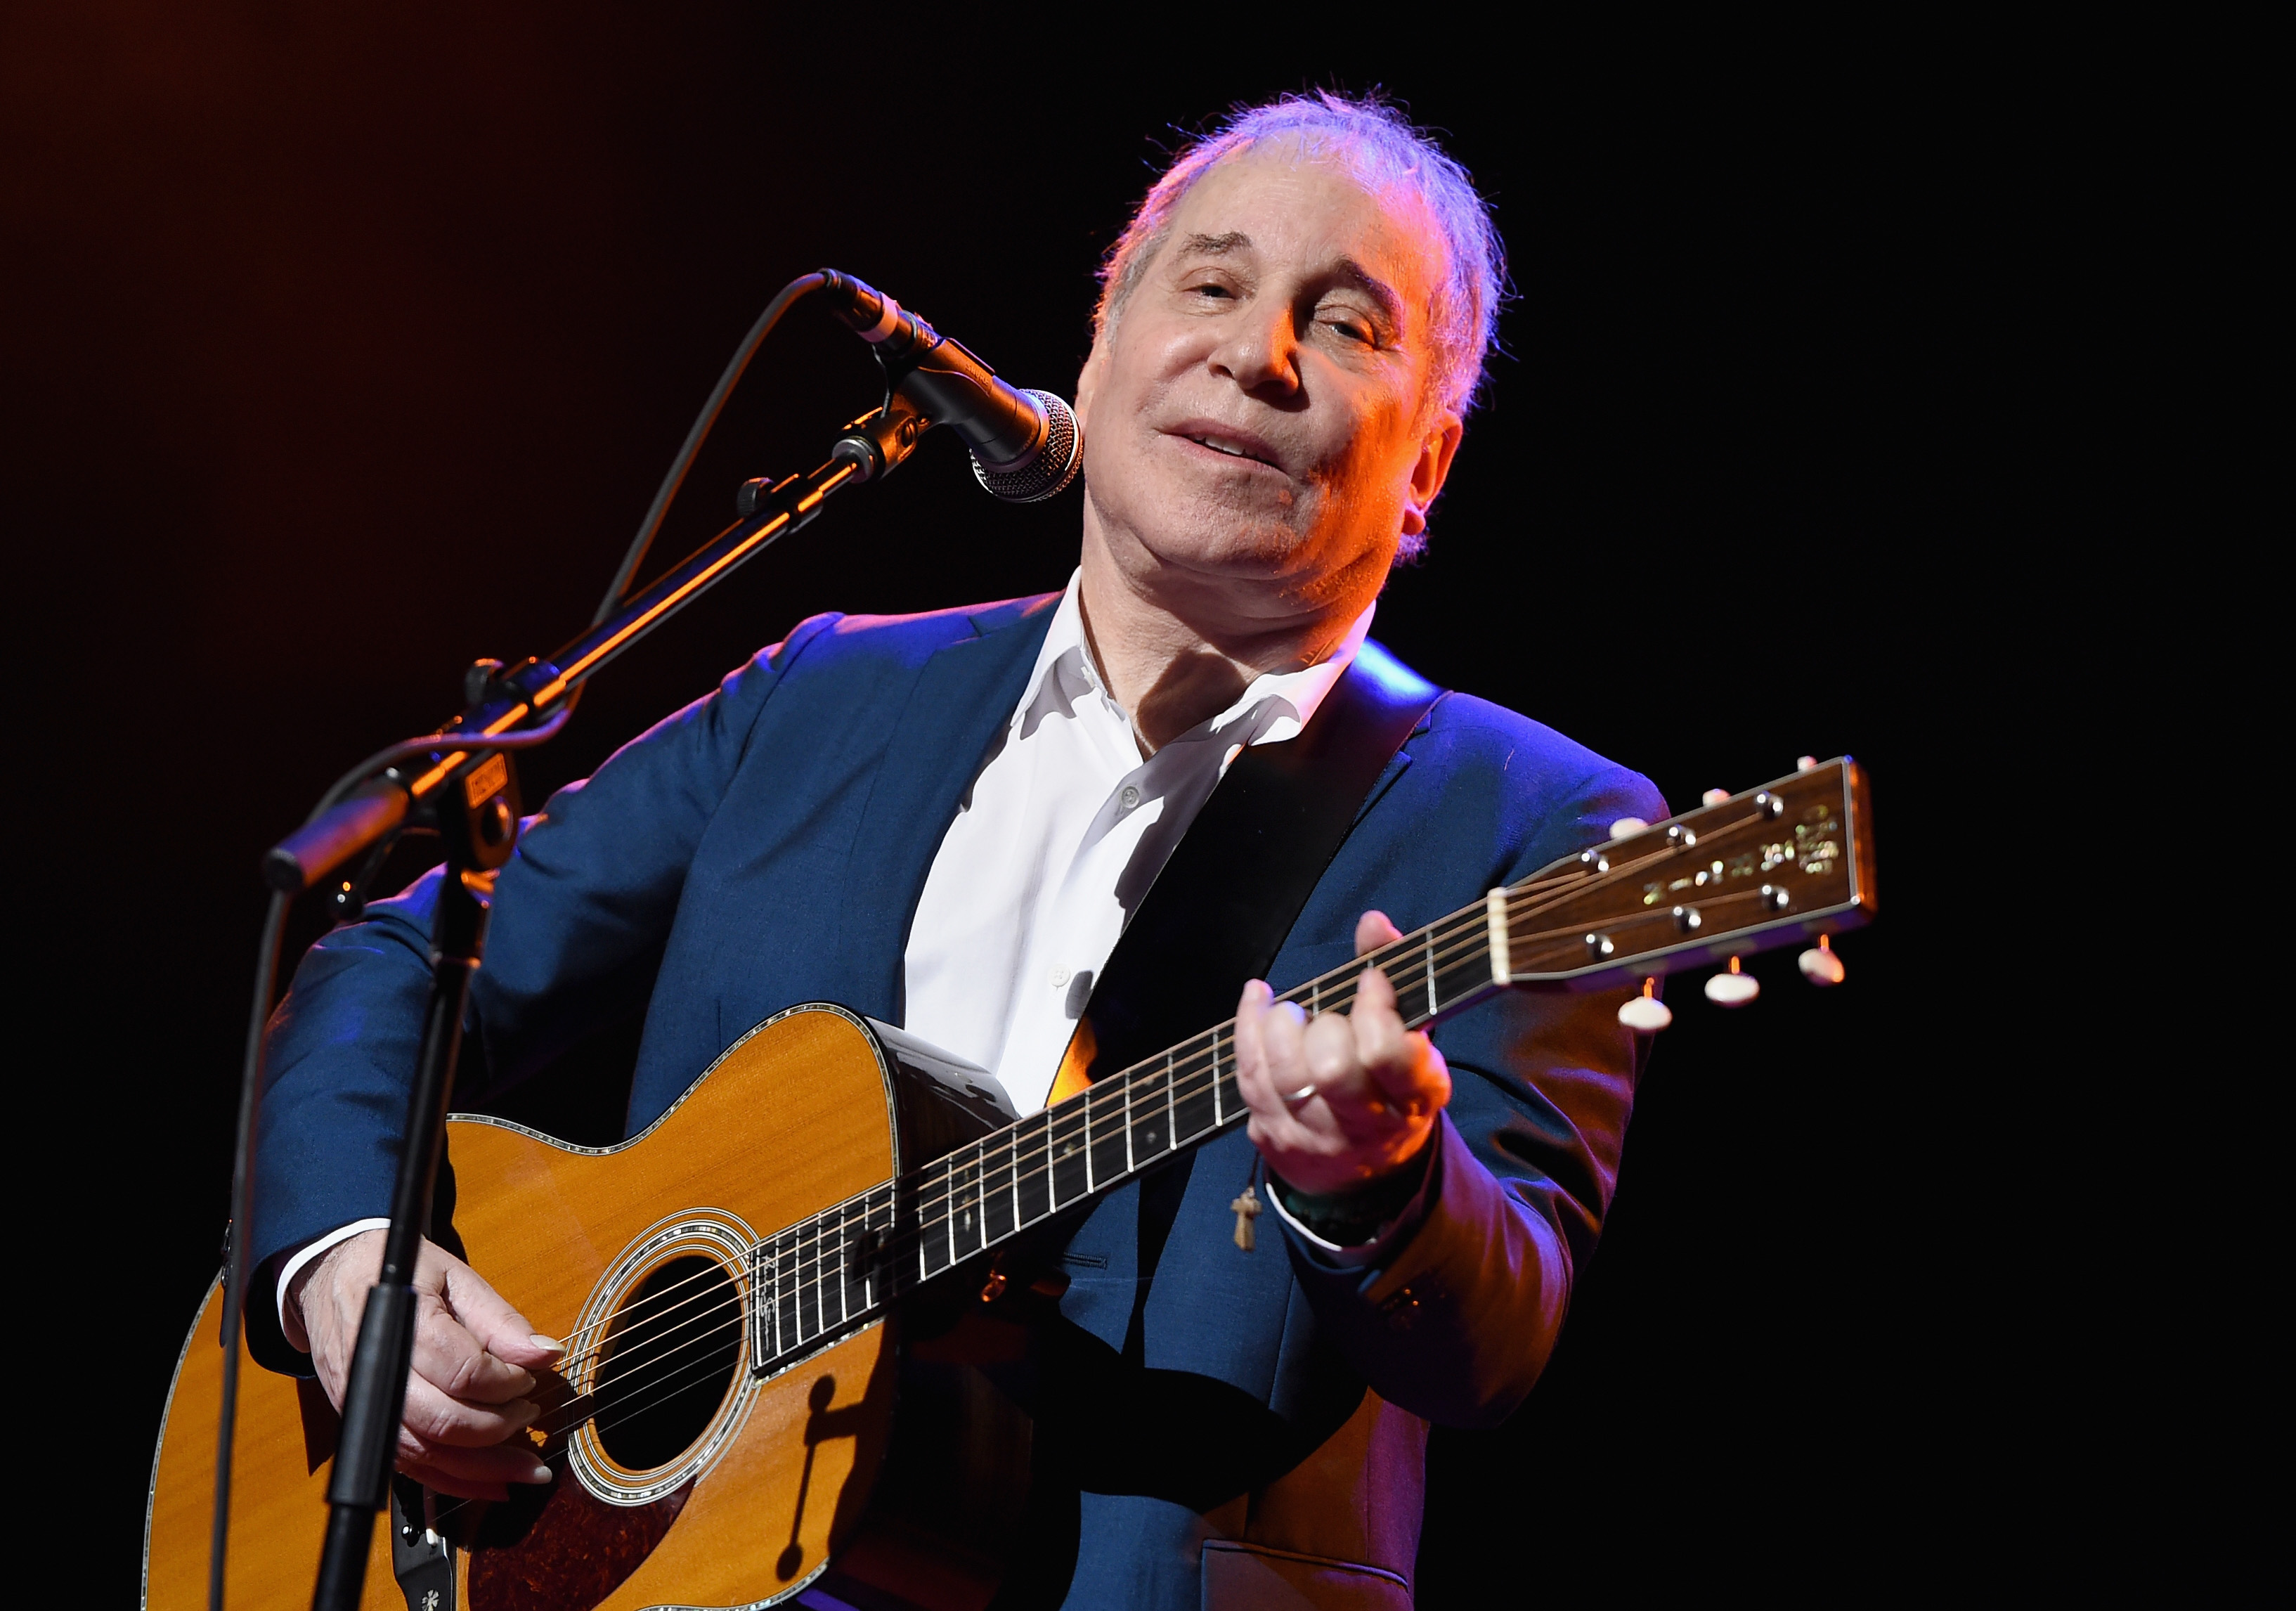 paul simon's reworked song